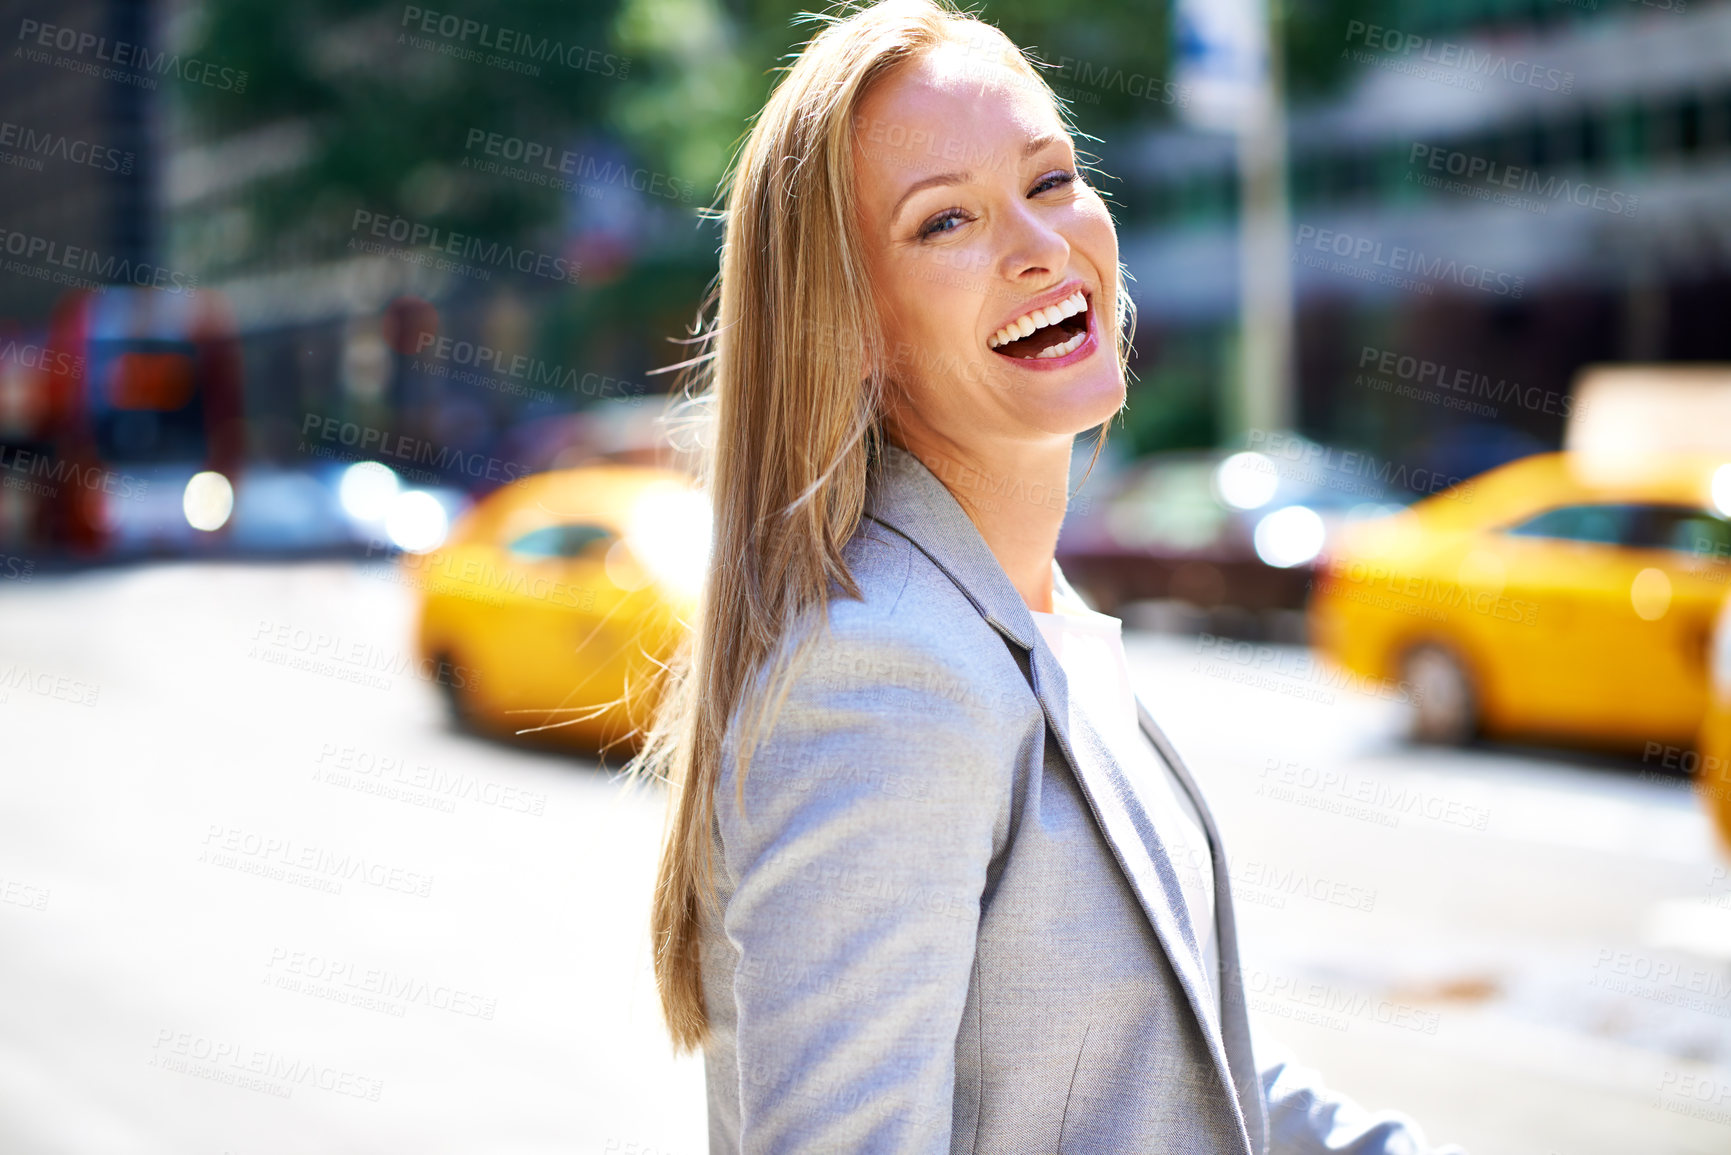 Buy stock photo Laugh, professional and portrait of businesswoman, city or urban for corporate employee. Confidence, smile and commute or travel to workplace in New York, business consultant and entrepreneur